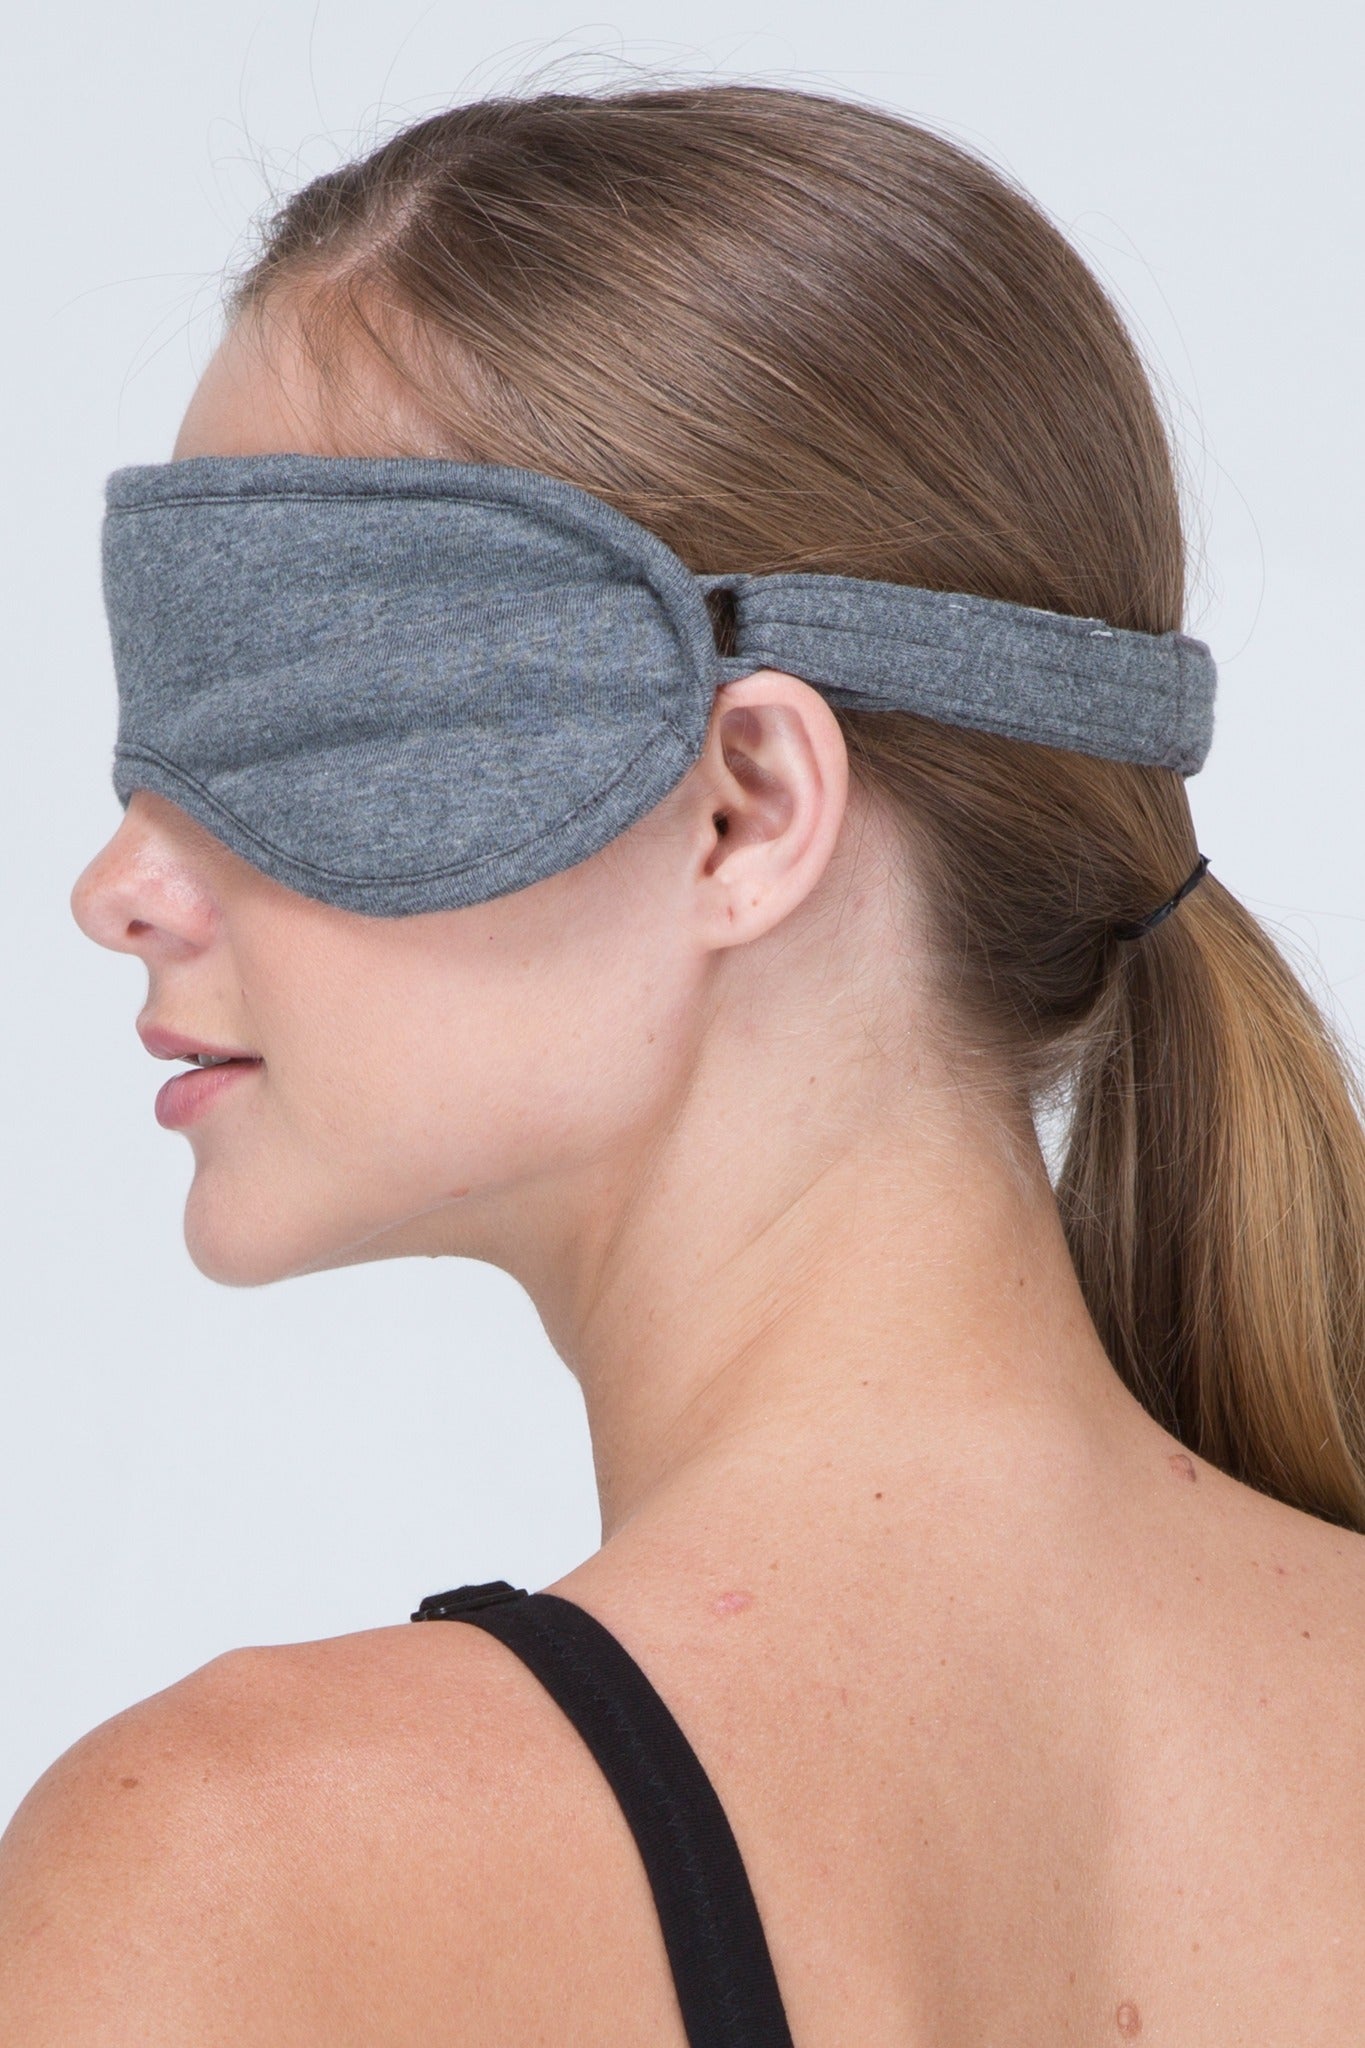 Cottonique hypoallergenic sleep eye mask recognized as part of